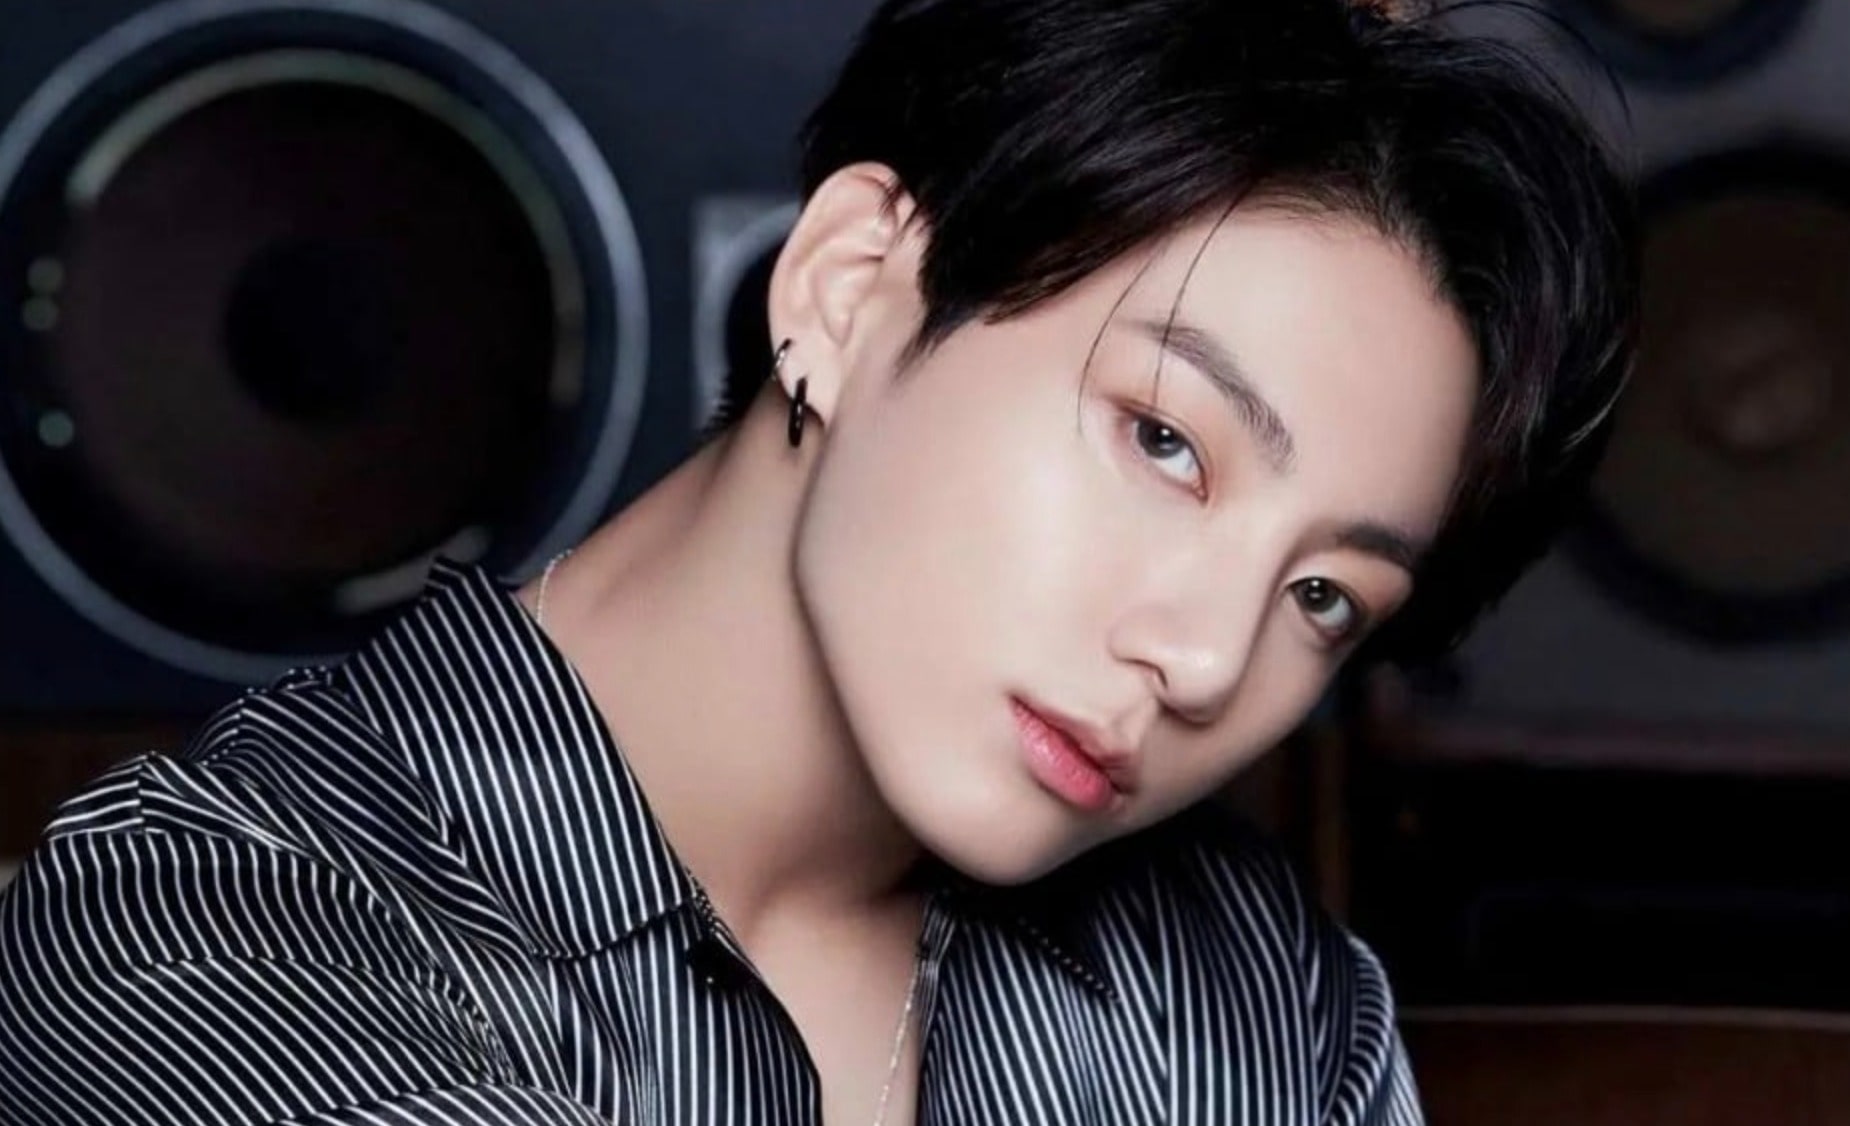 Jeon Jungkook Phone Number, Bio, Email ID, Autograph Address, Fanmail and Contact Details